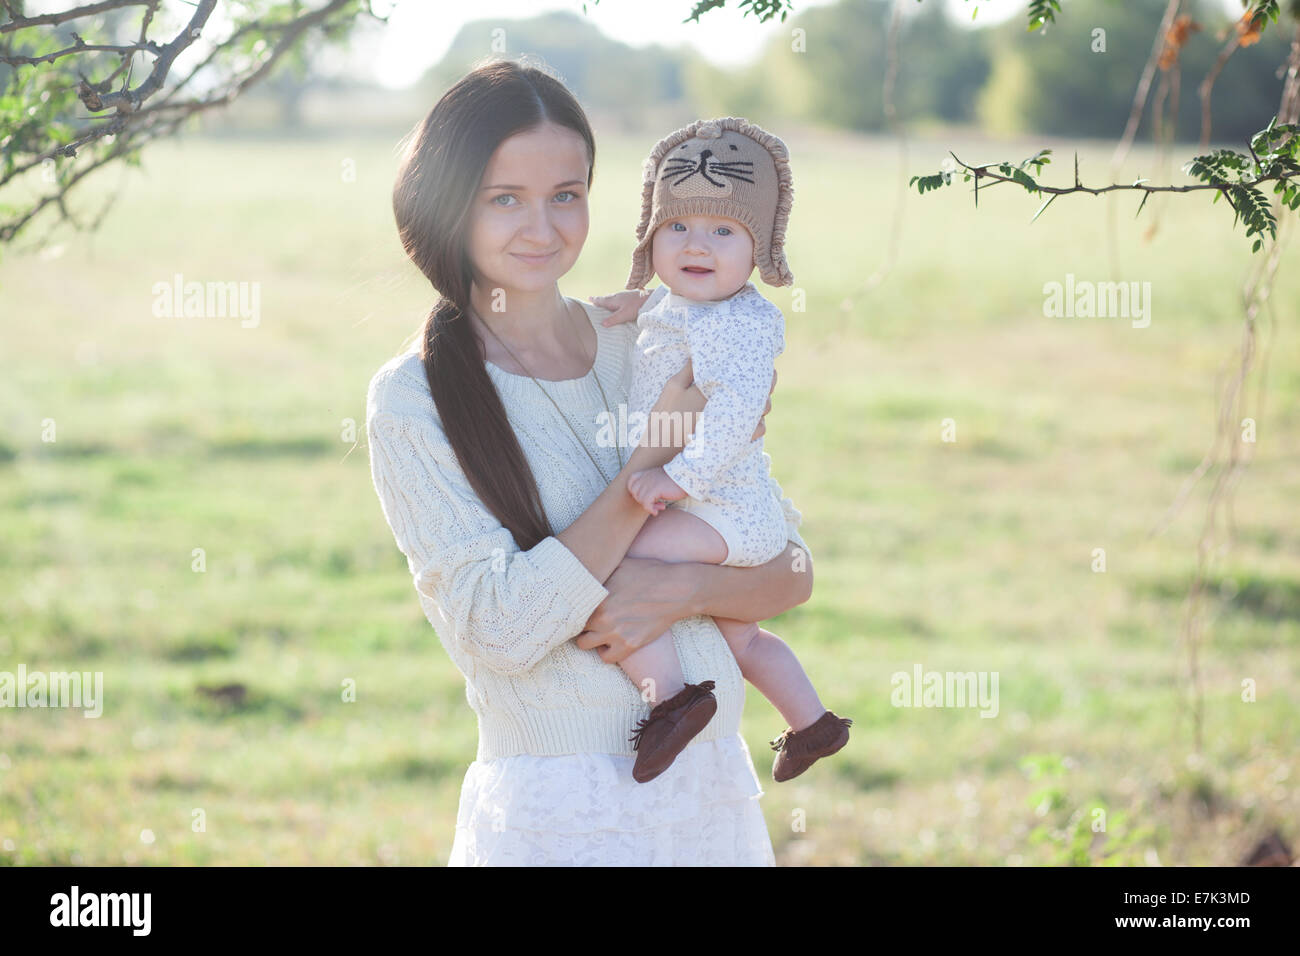 portrait of baby and mother Stock Photo